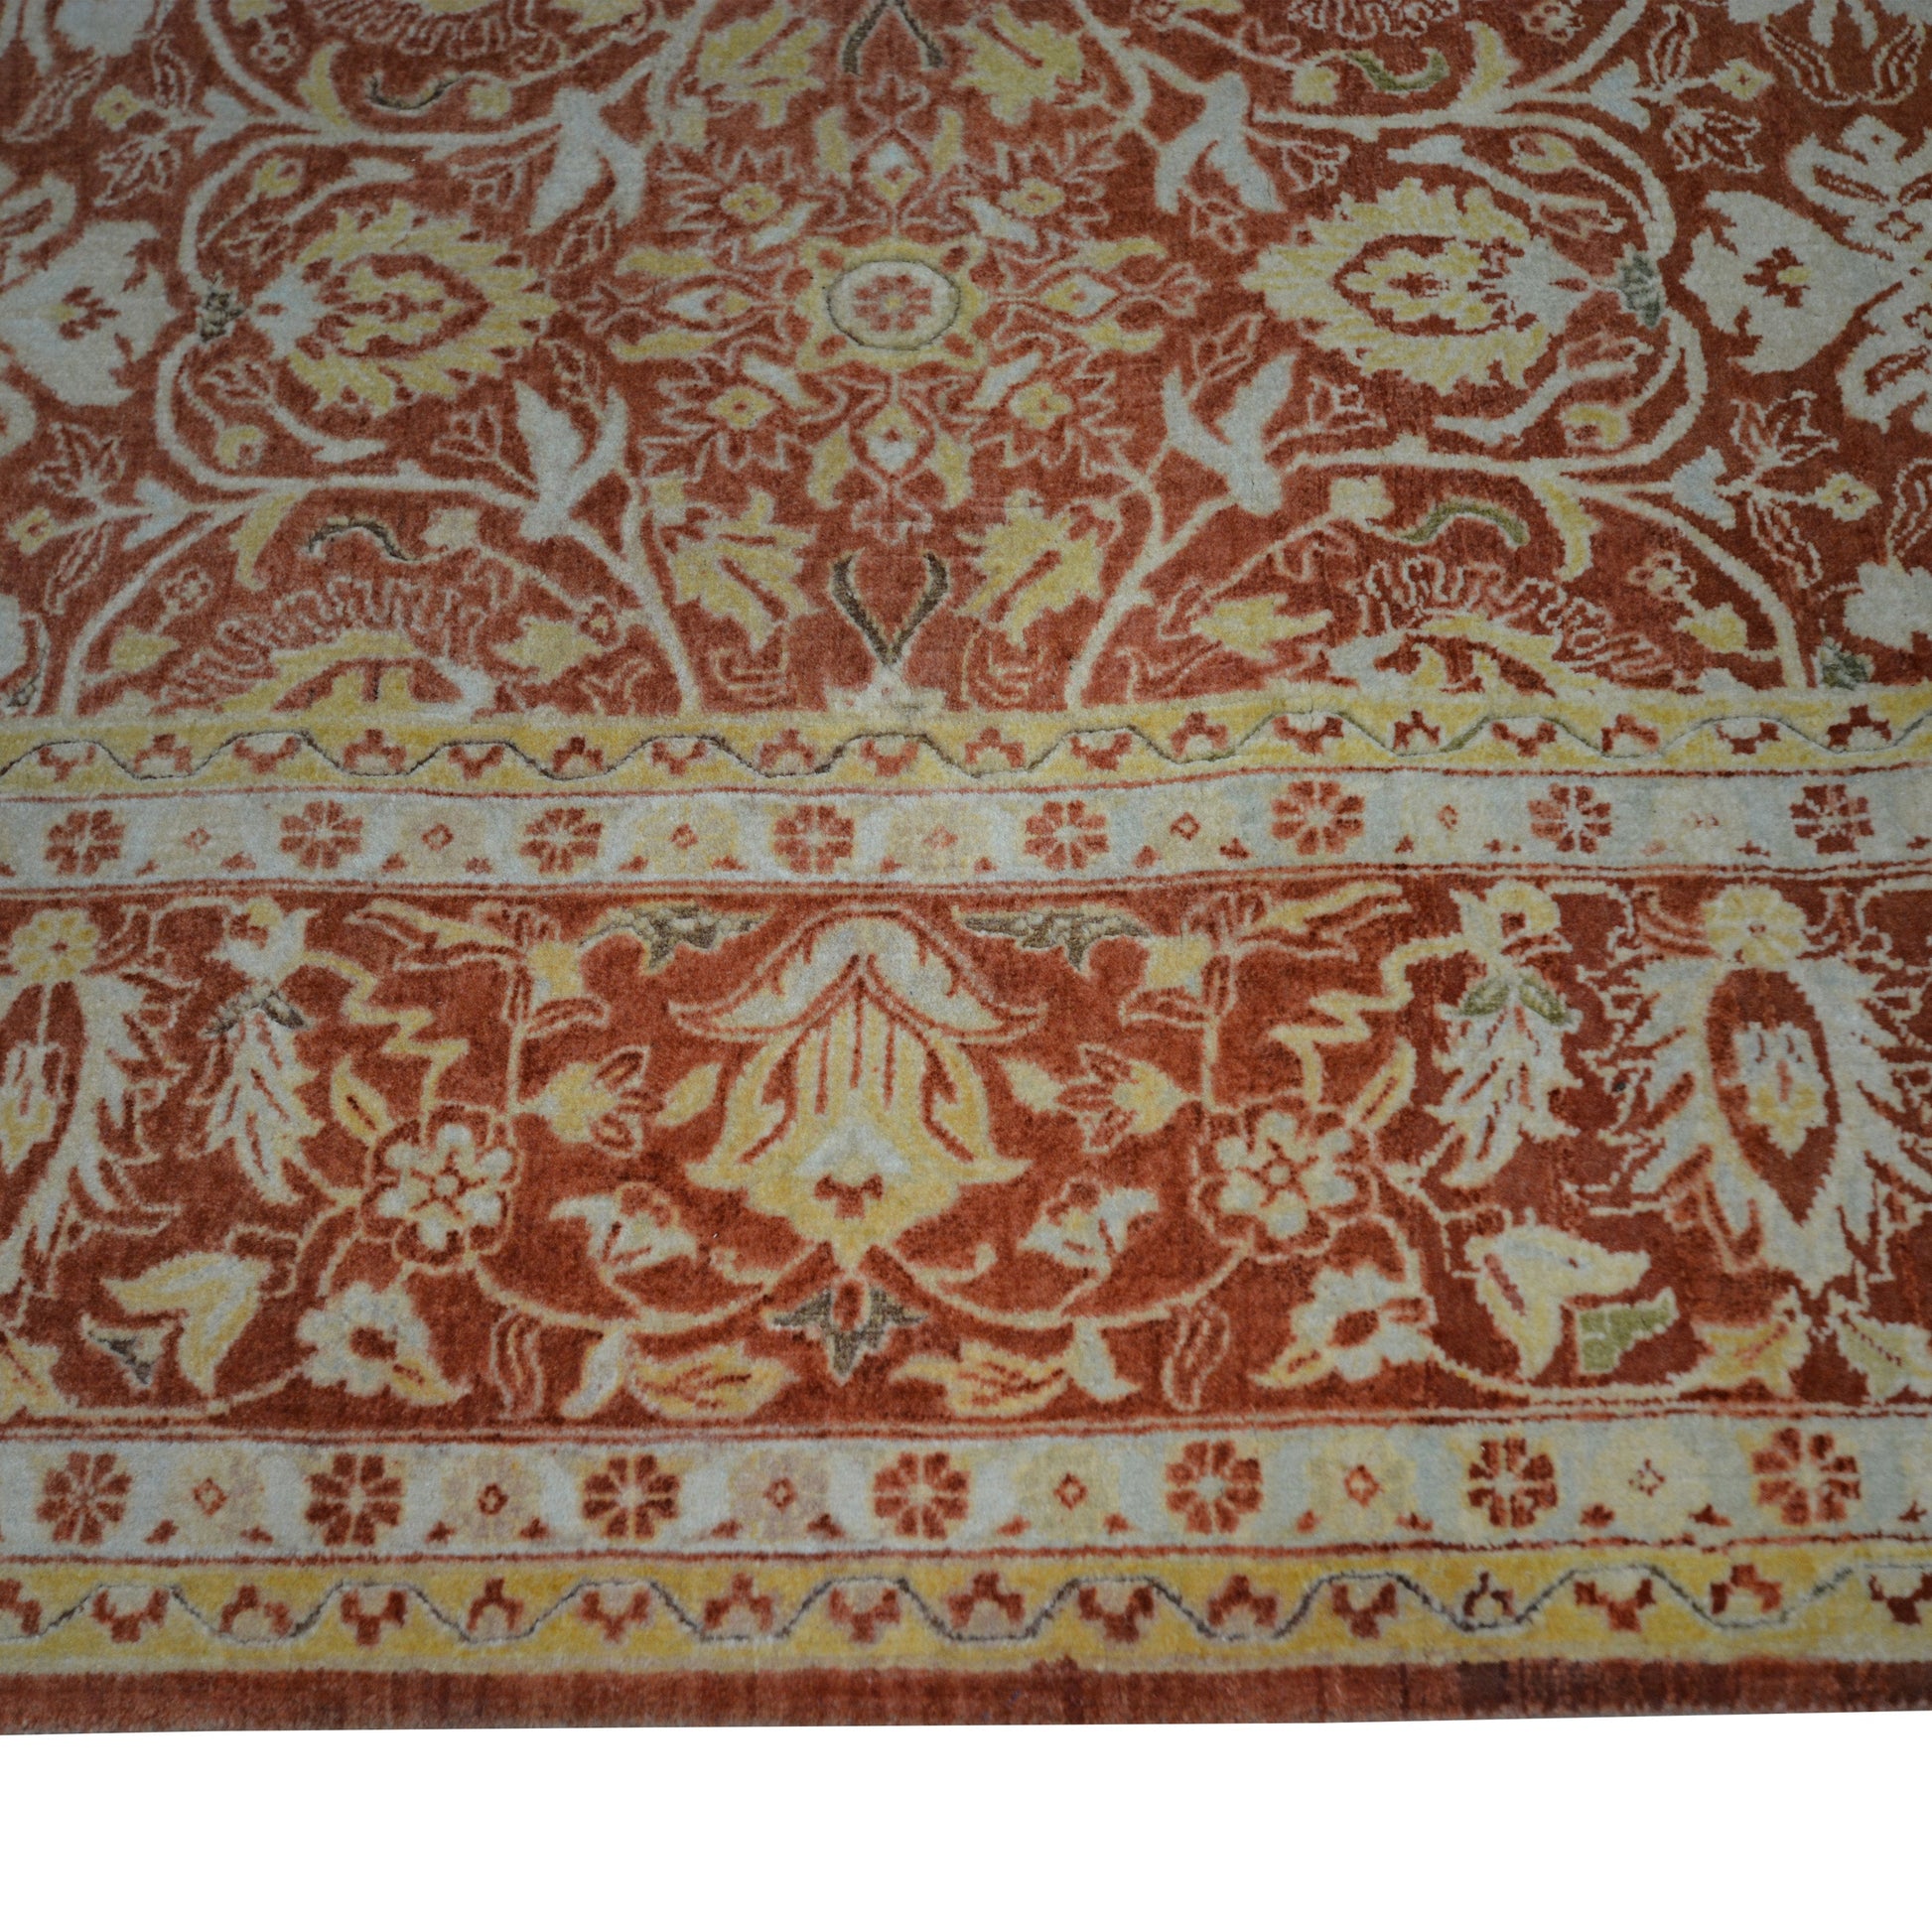 Get trendy with Garden Rust, Ivory and Gold Traditional Persian Pure Wool Luxury Handknotted Area Rug - Traditional Rugs available at Jaipur Oriental Rugs. Grab yours for $3450.00 today!